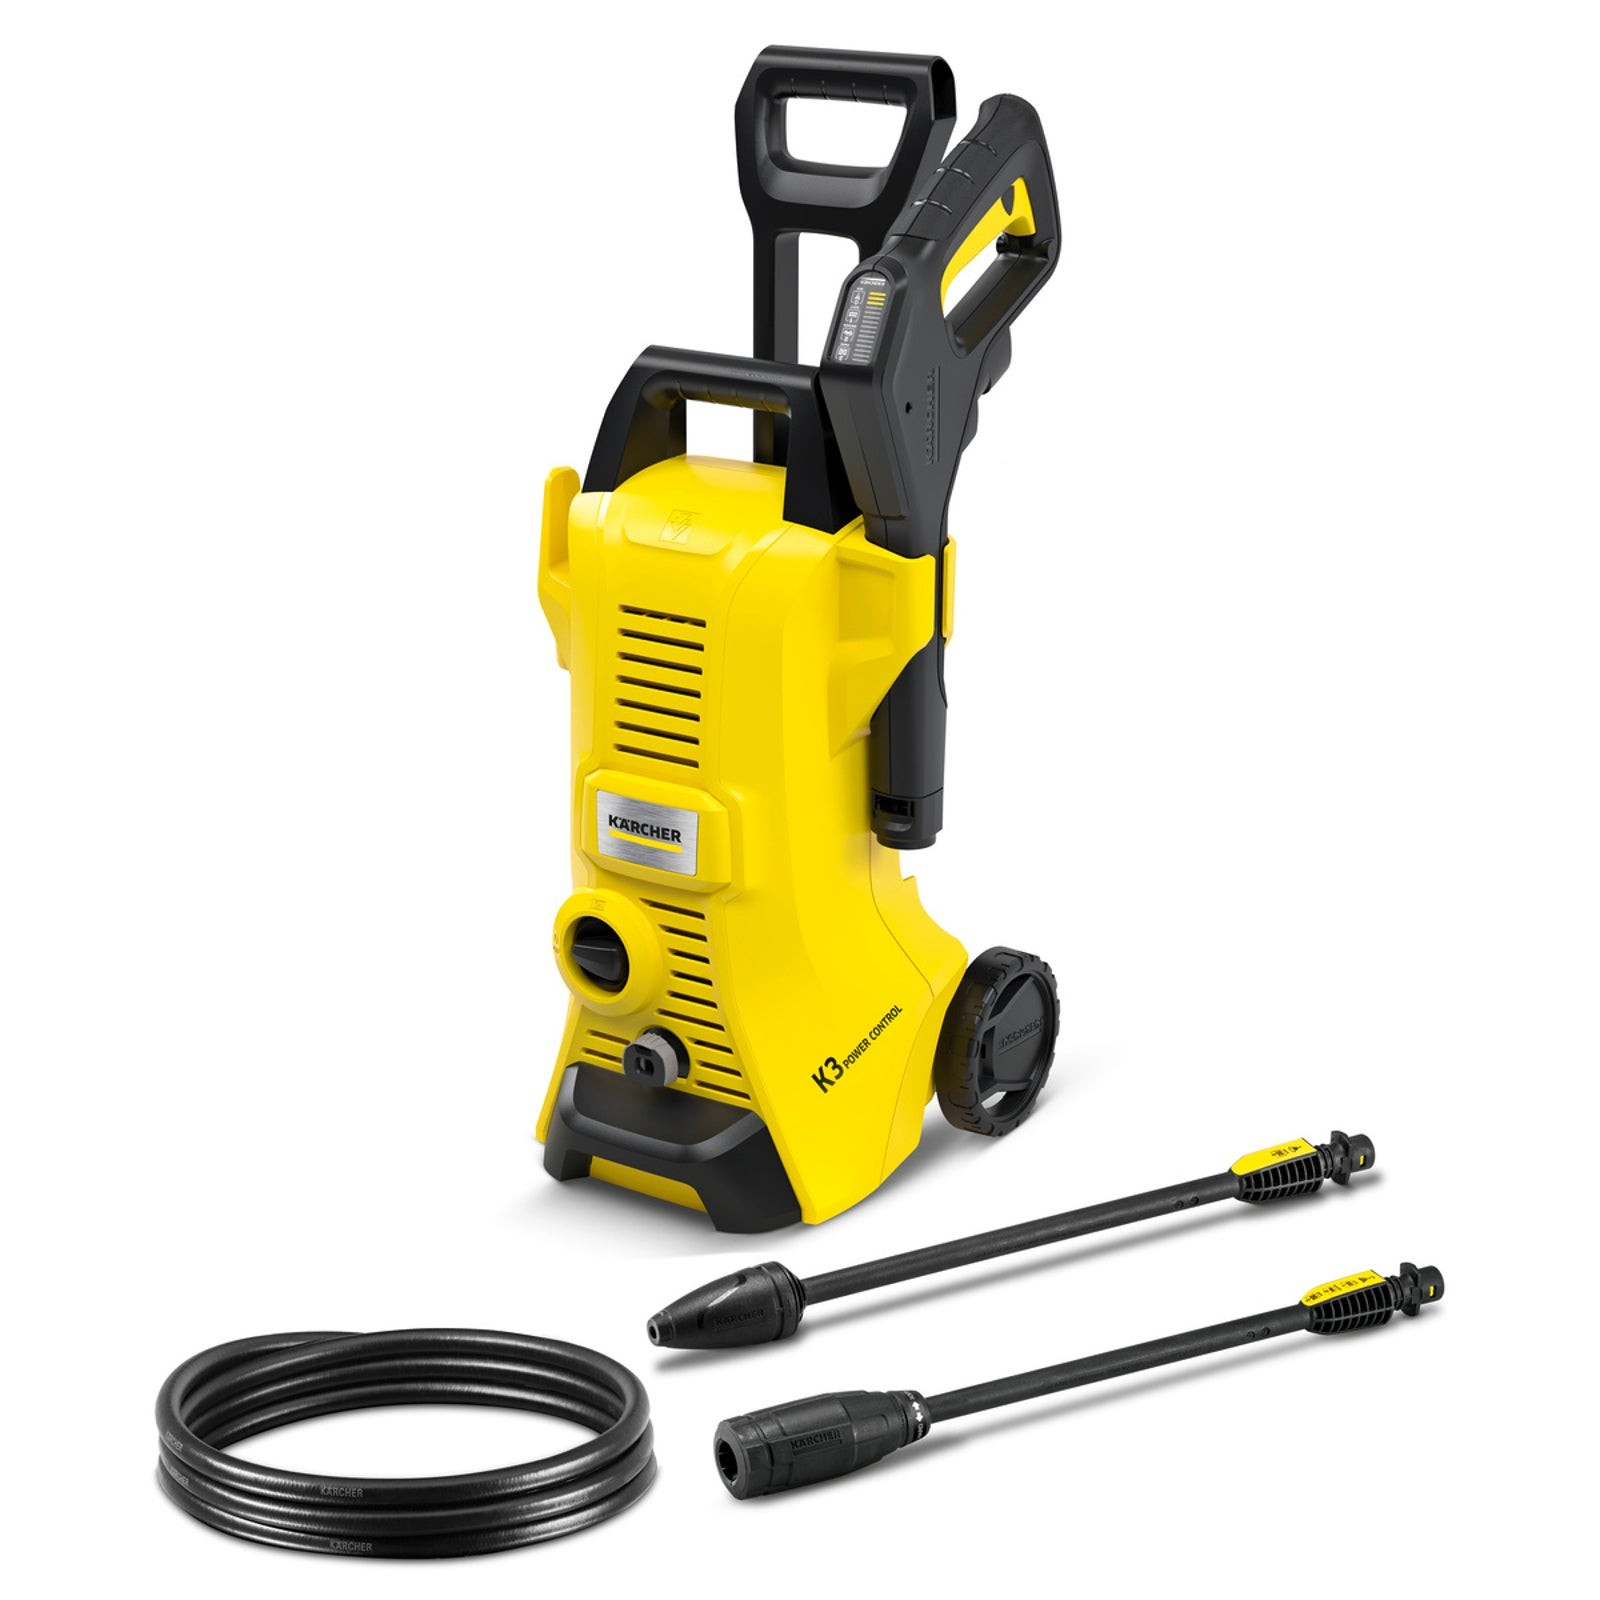 K3 Power Control 1800 PSI Electric Pressure Washer